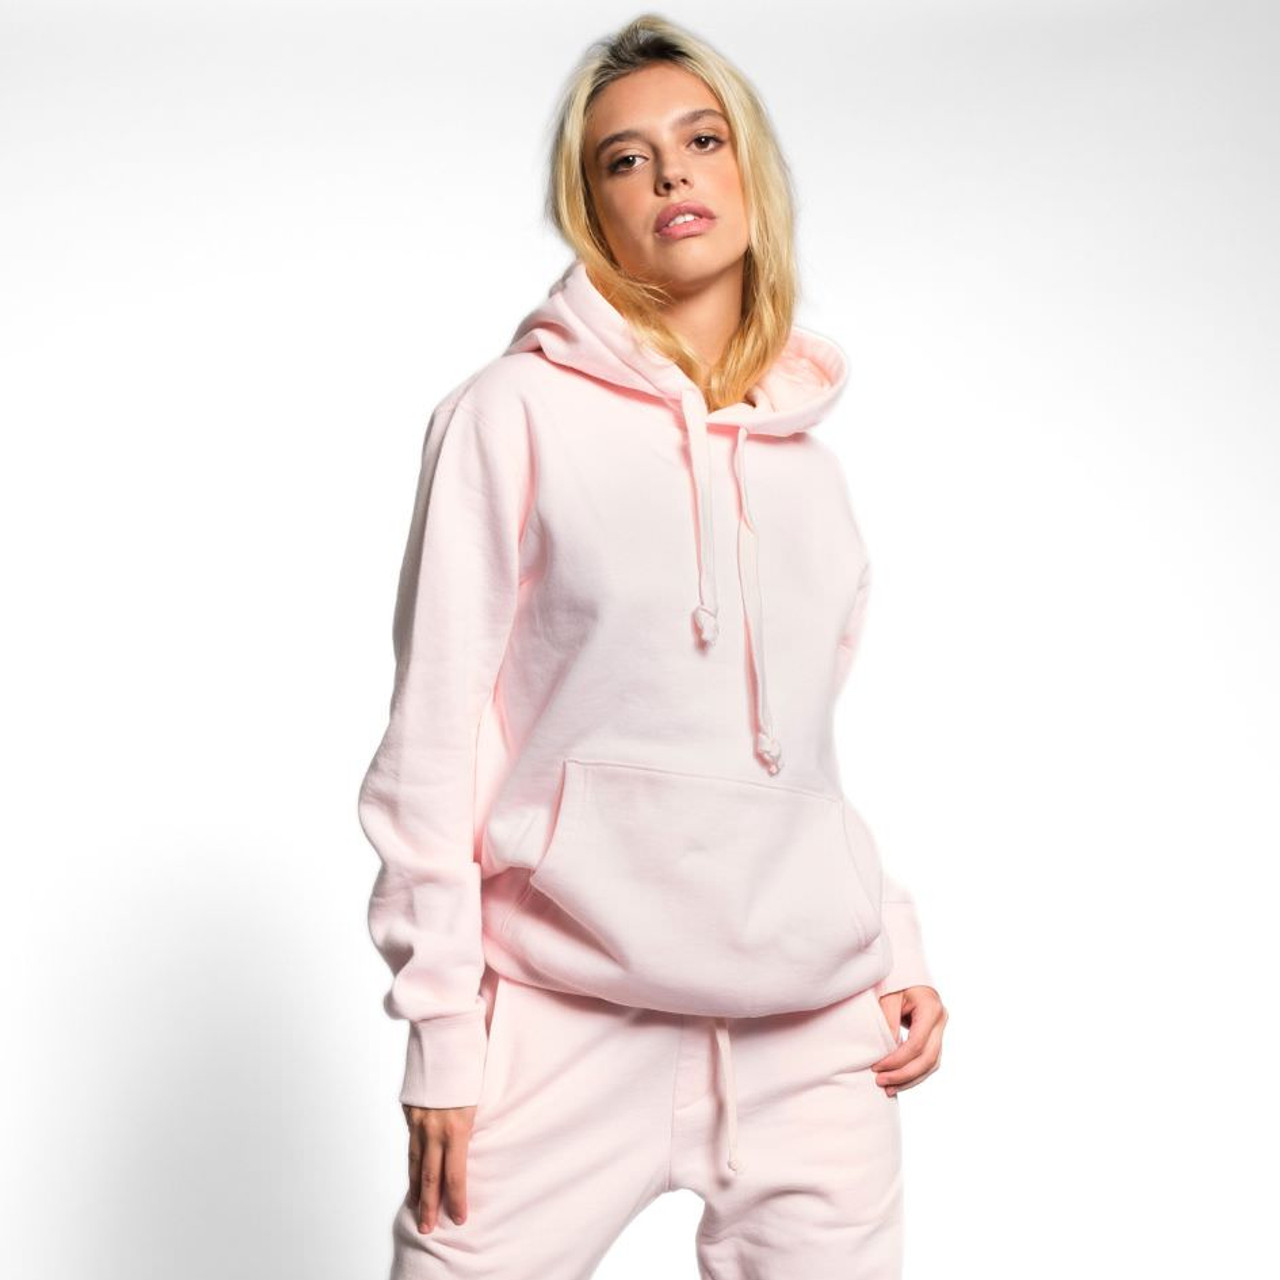 https://cdn11.bigcommerce.com/s-12aon899vh/images/stencil/1280x1280/products/344/1966/10JustSweatshirts-100-cotton-ultrasoft-baby-pink-hoodie__11184.1706366703.jpg?c=1